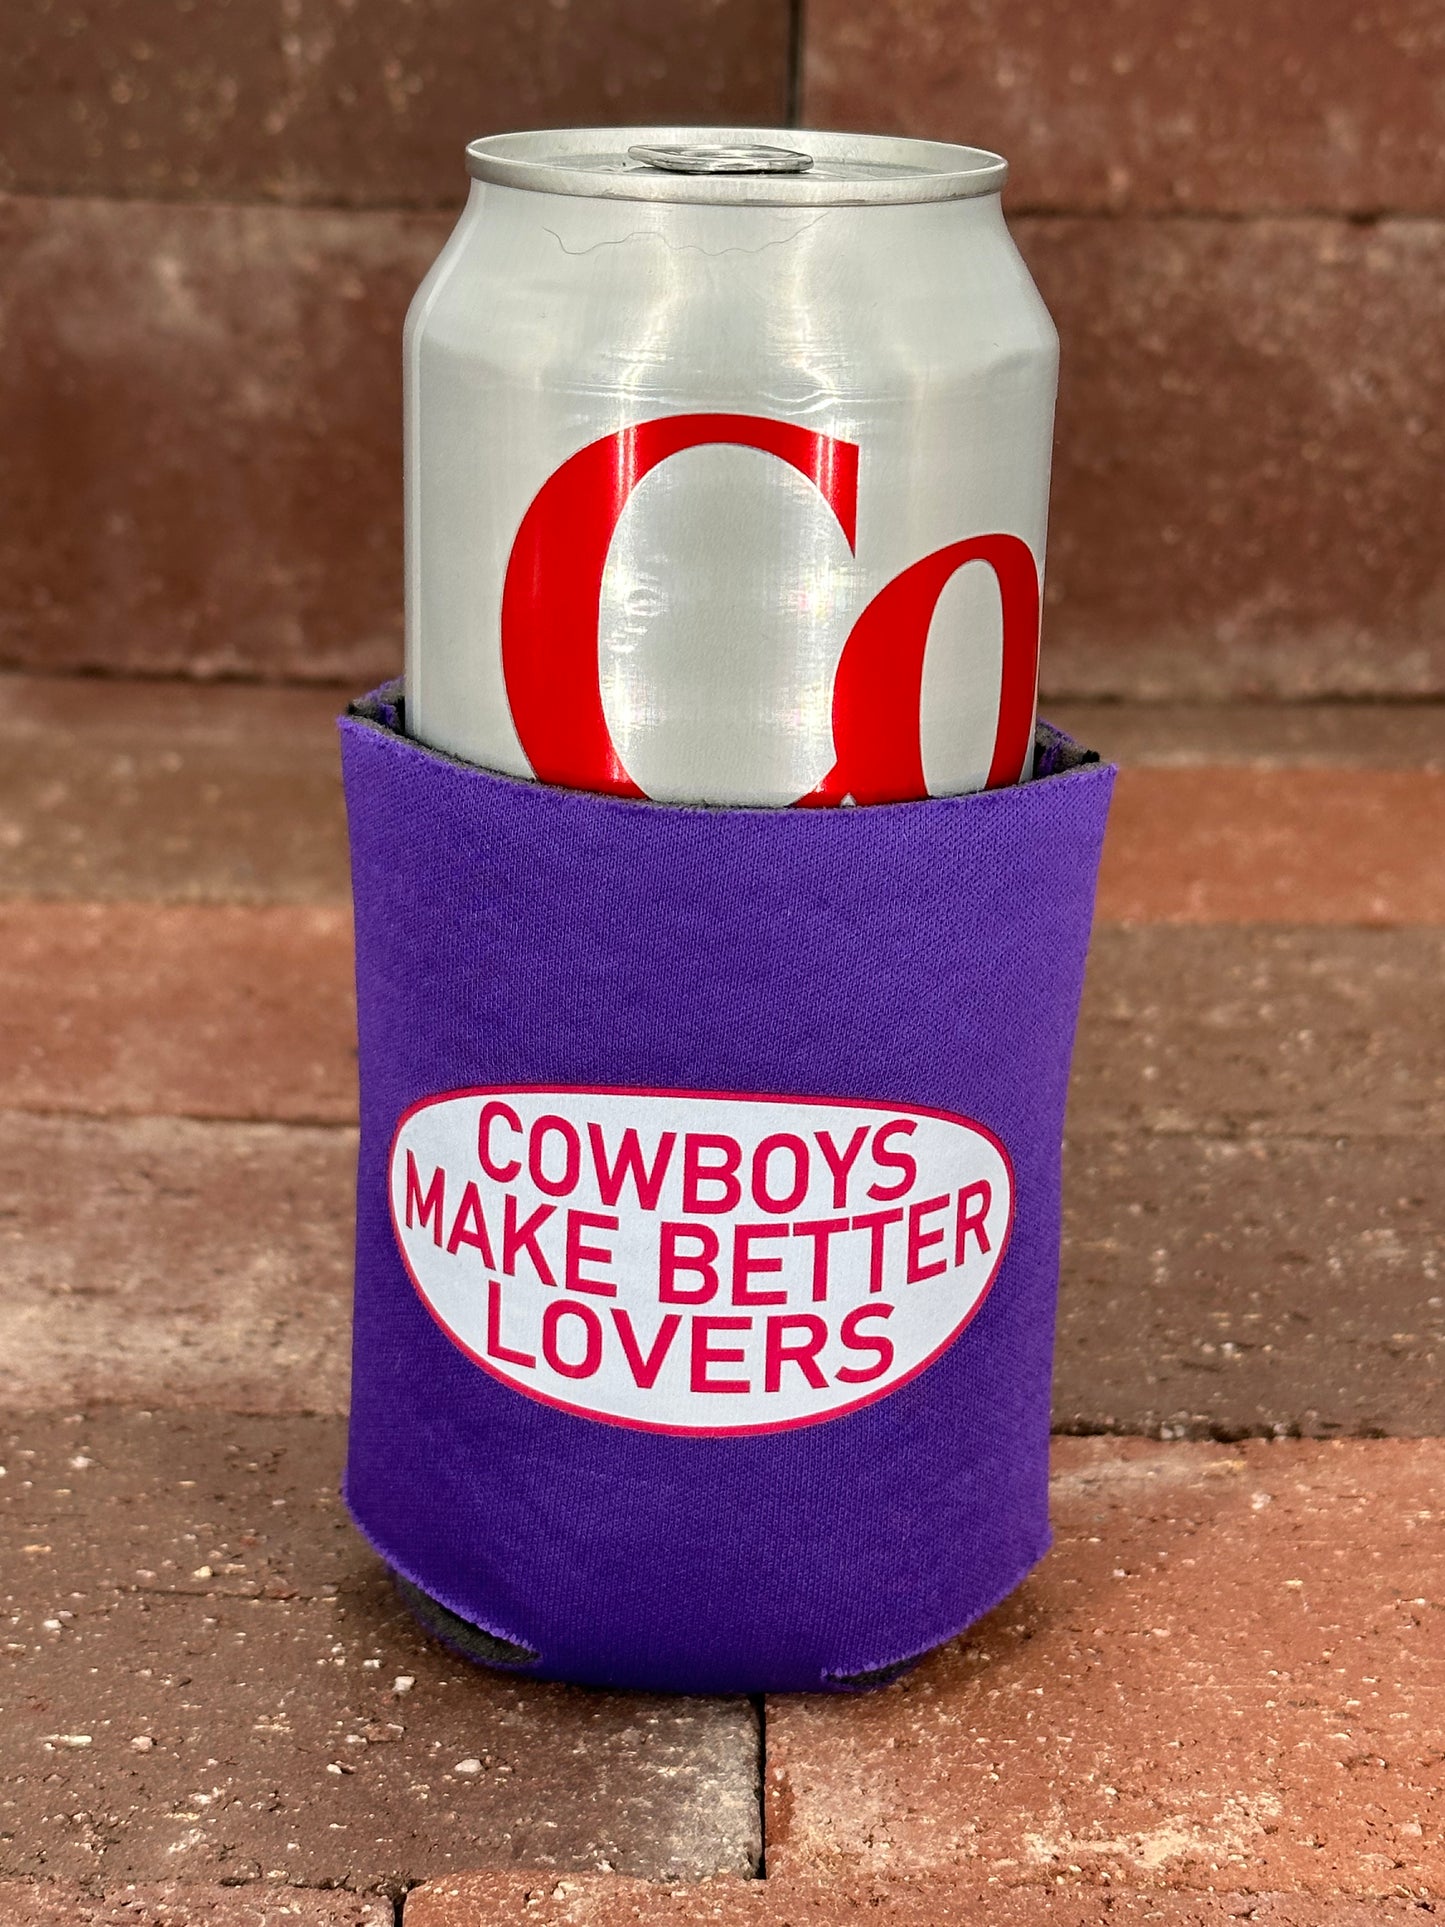 Cactus Alley Hat Co Koozie - Purple/ Better Lovers in Hot Pink